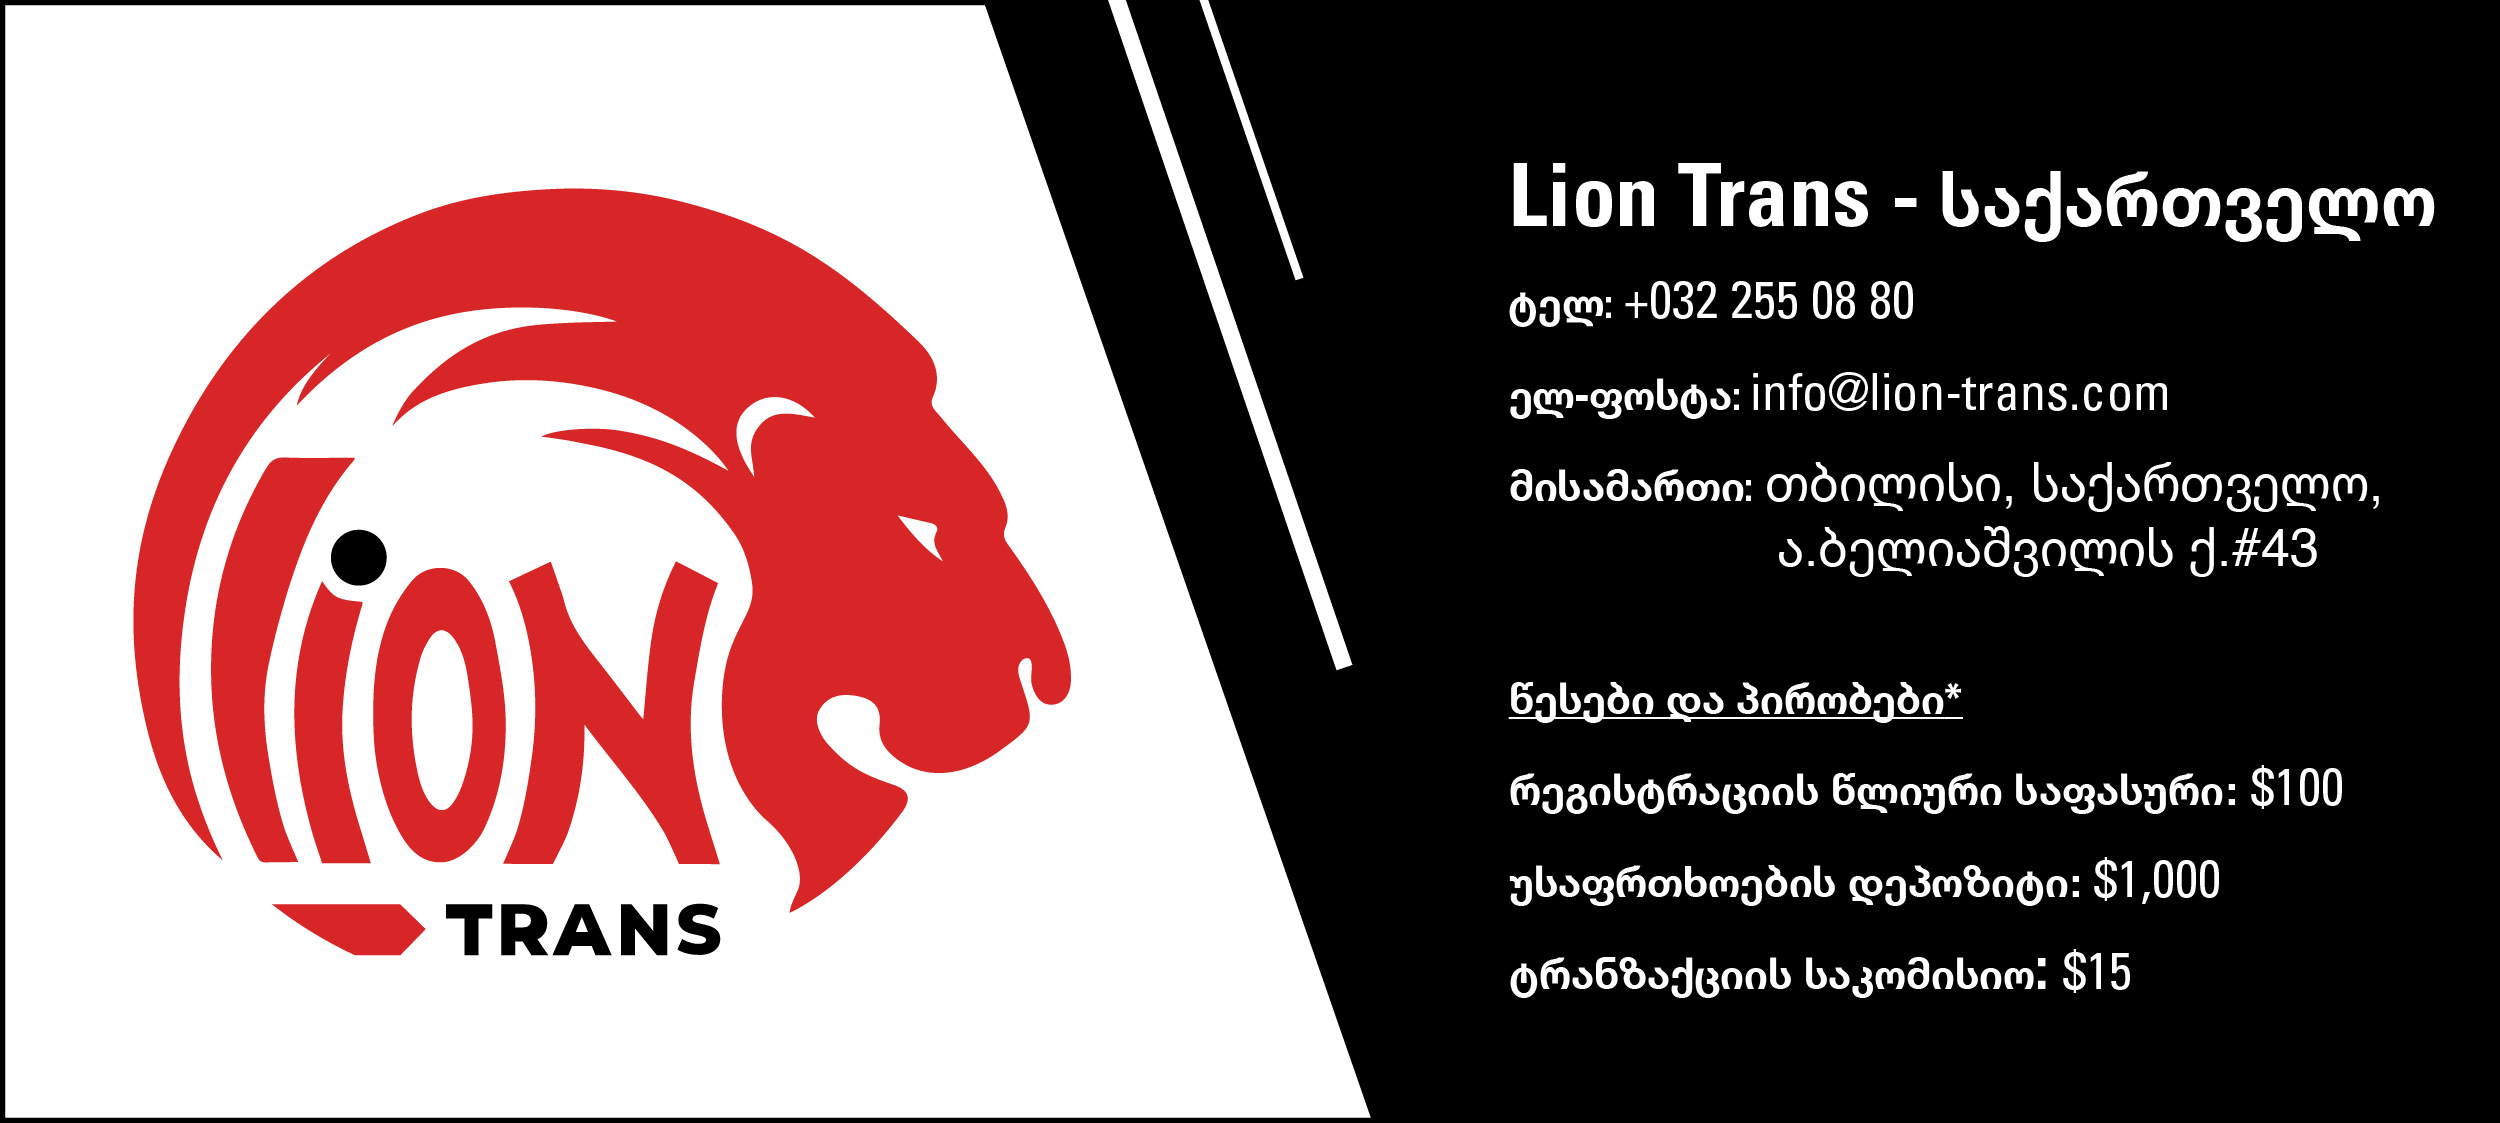 Global Lions Trans Contact Card